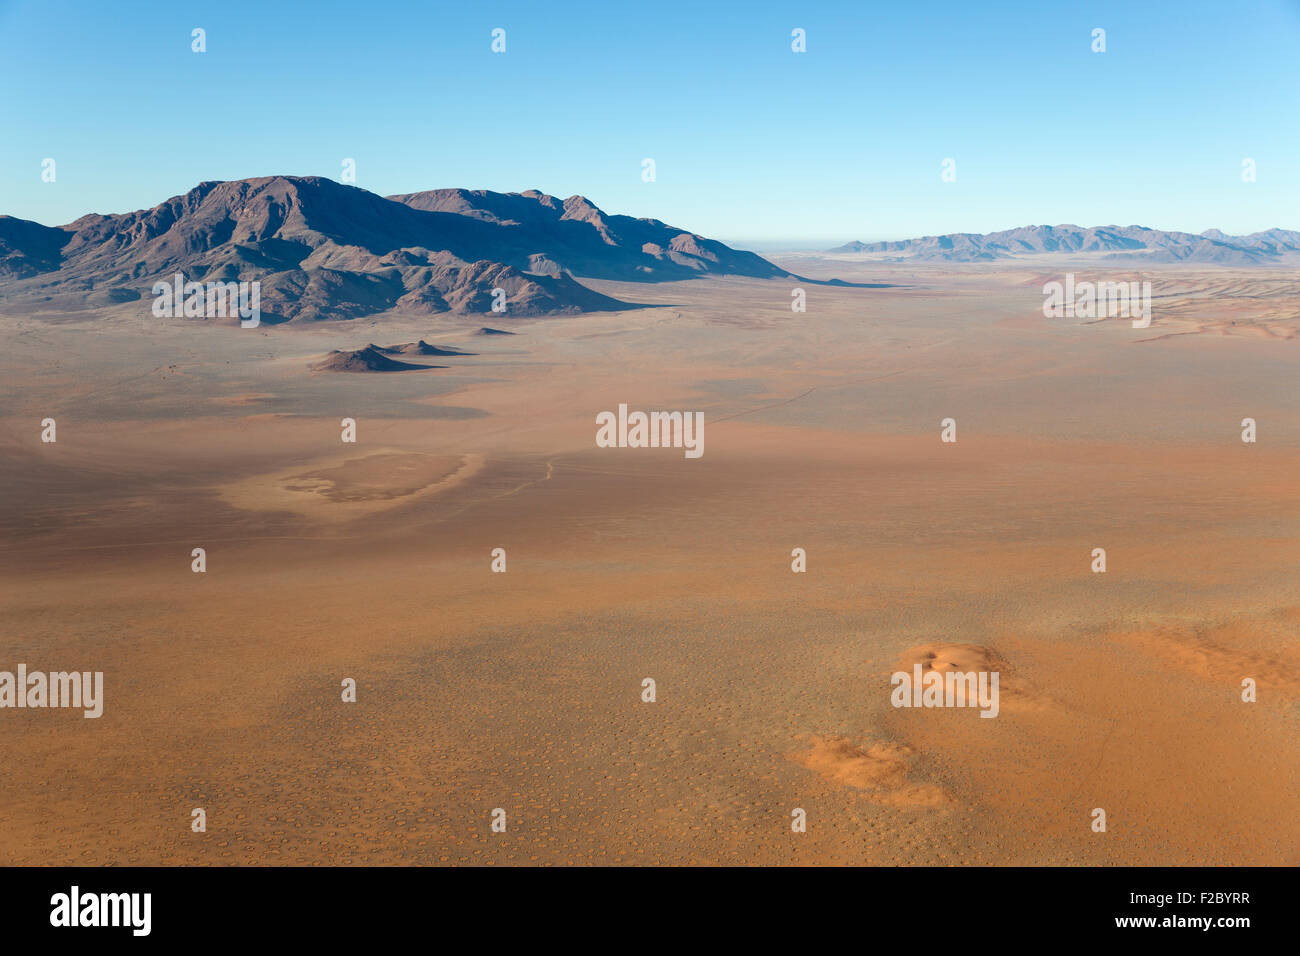 Arid desert plains with so-called Fairy Circles and isolated mountain ridges at the edge of the Namib Desert, aerial view from a Stock Photo